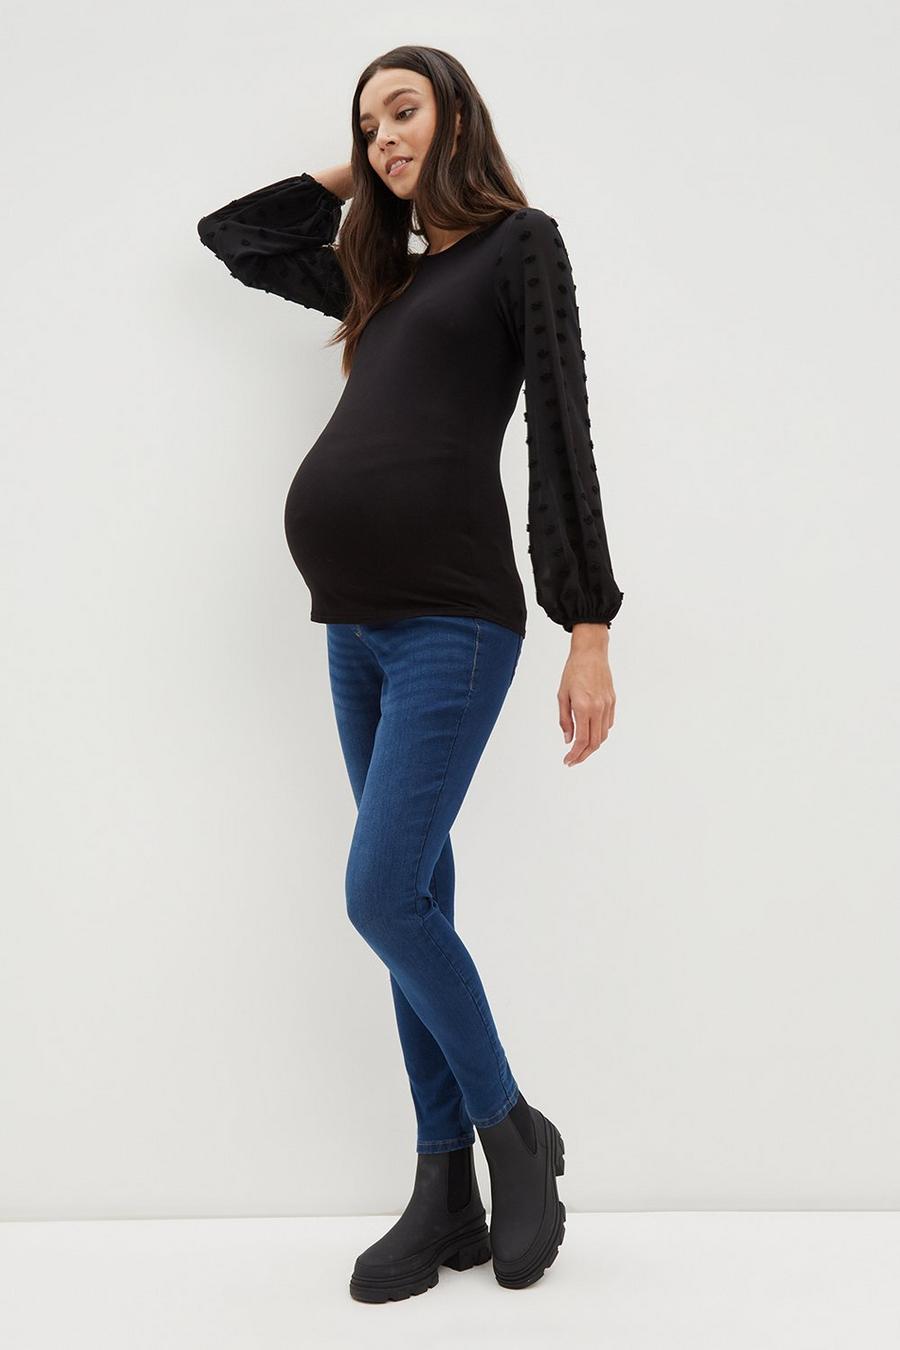 Maternity Black Top with Woven Spot Textured Sleeve